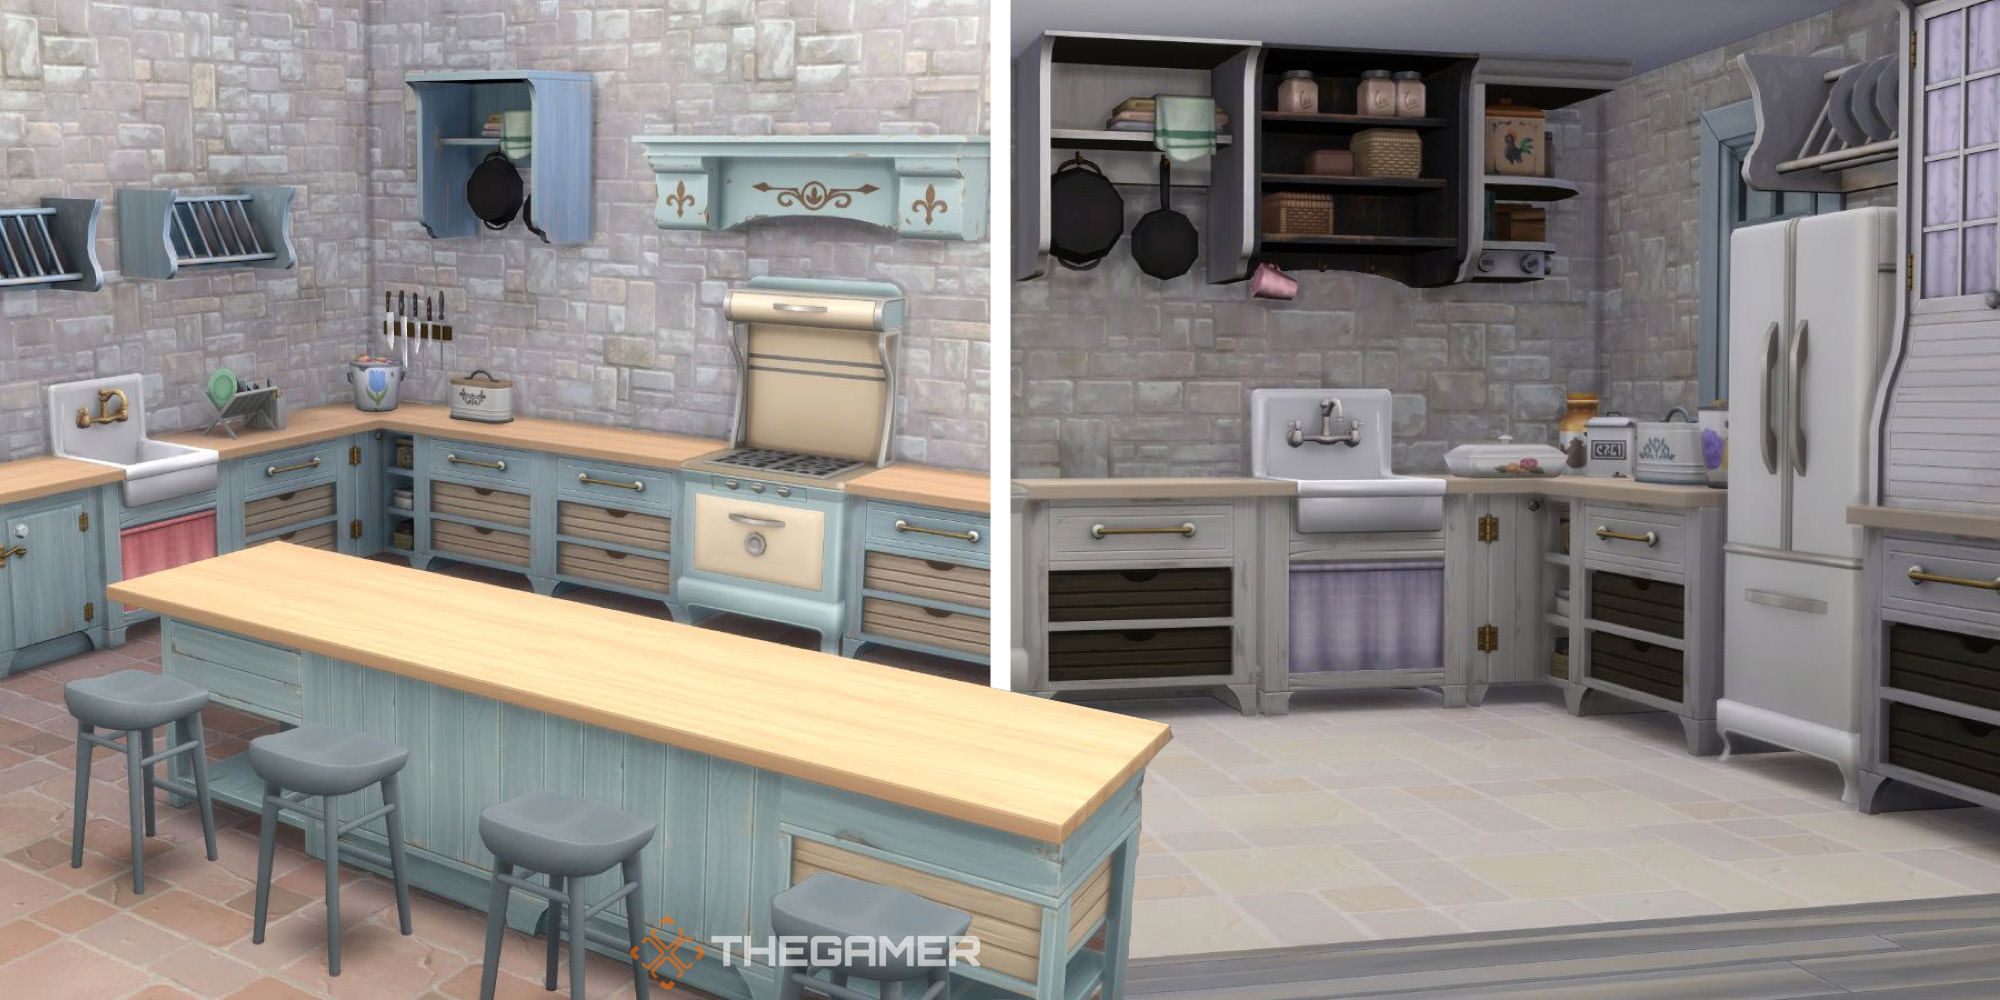 The Sims 4 Kits   Everything Included In Country Kitchen Kit 